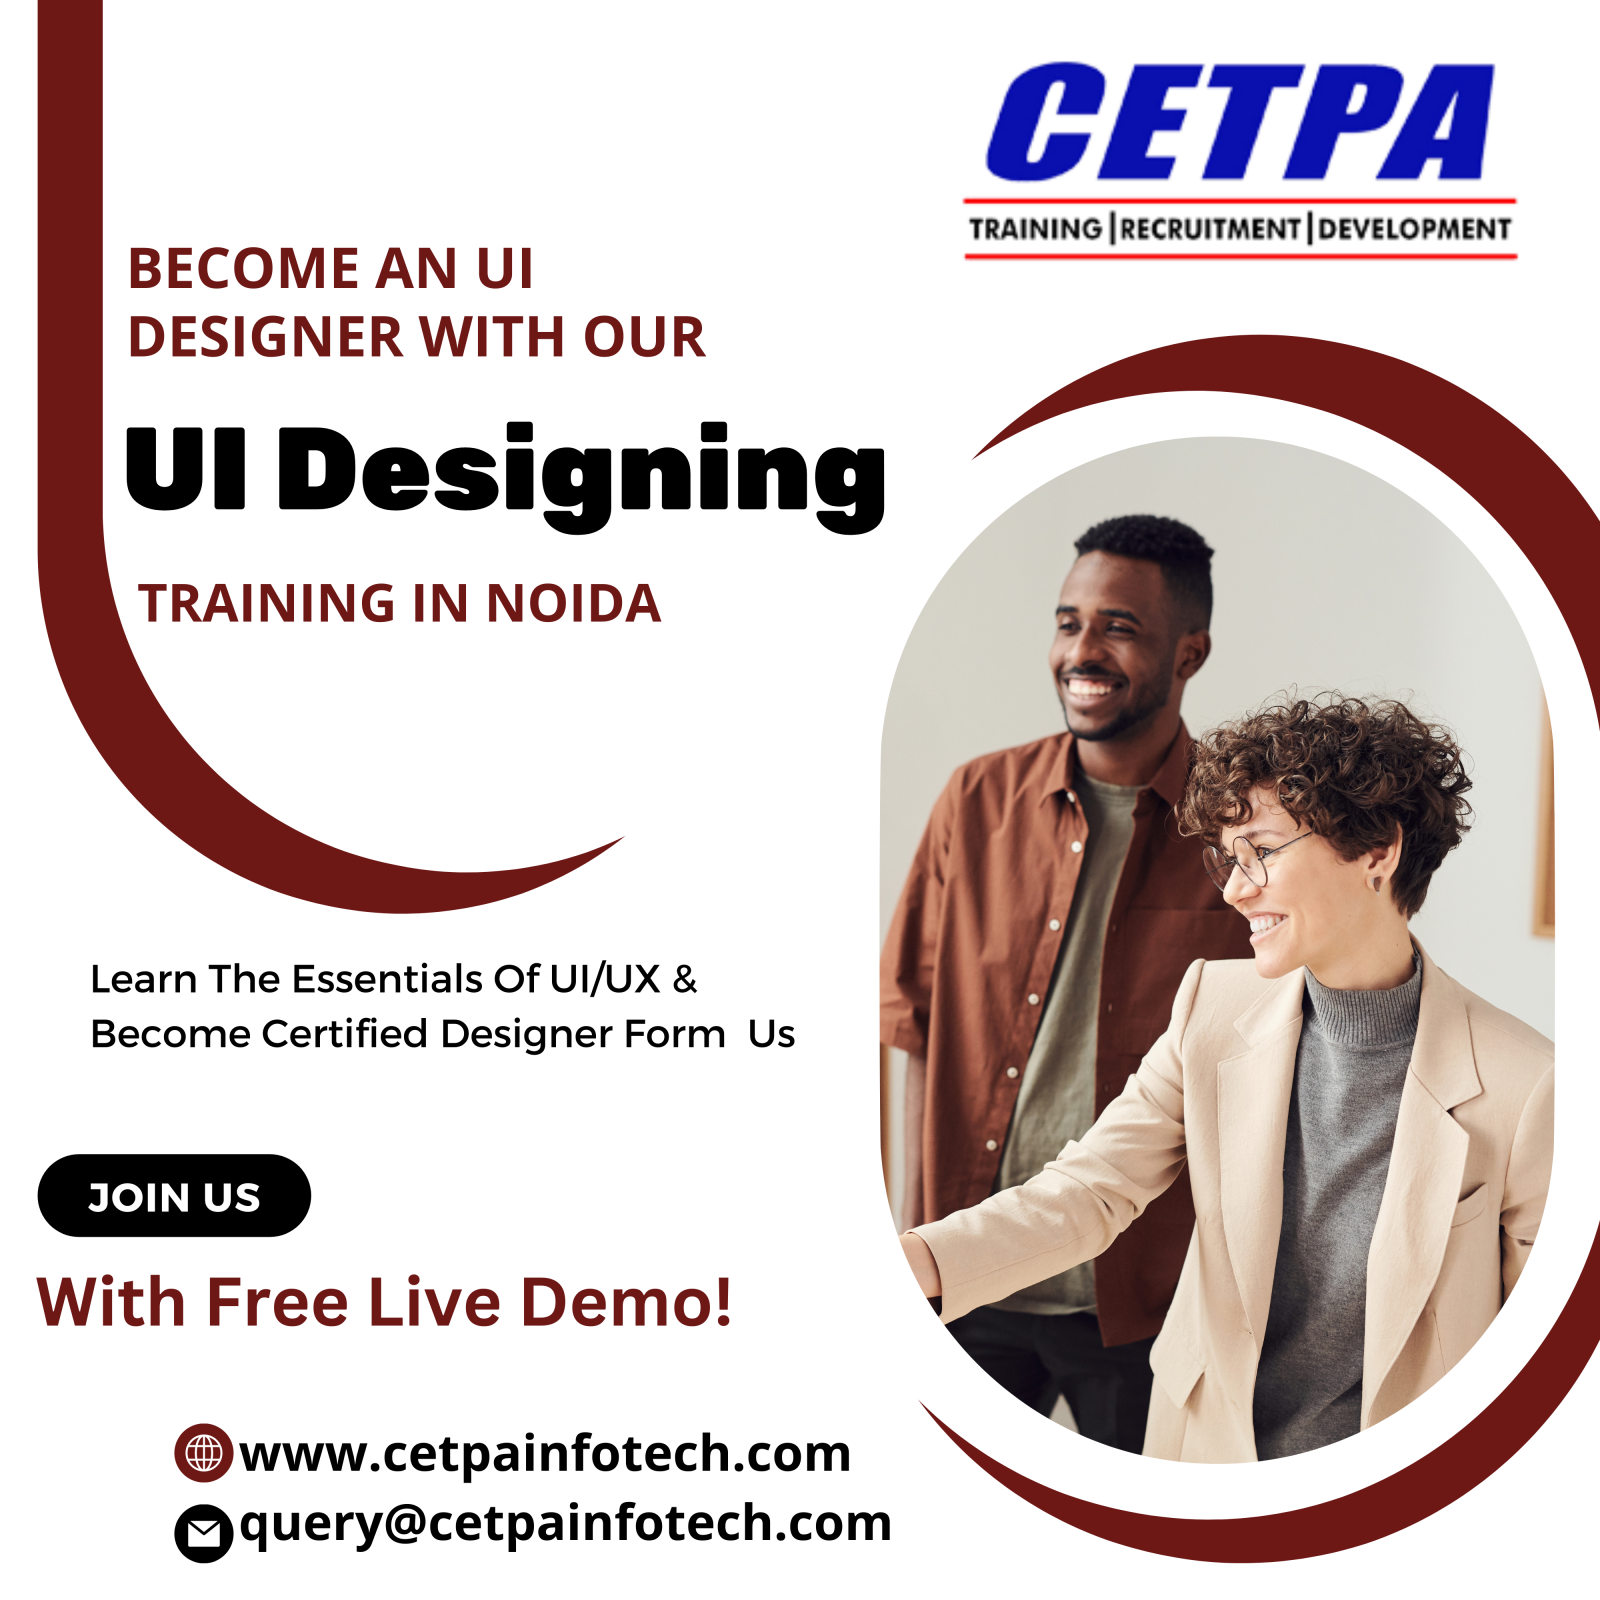 Learn UI Designing Course with Certification in Noida - CETPA Infotech